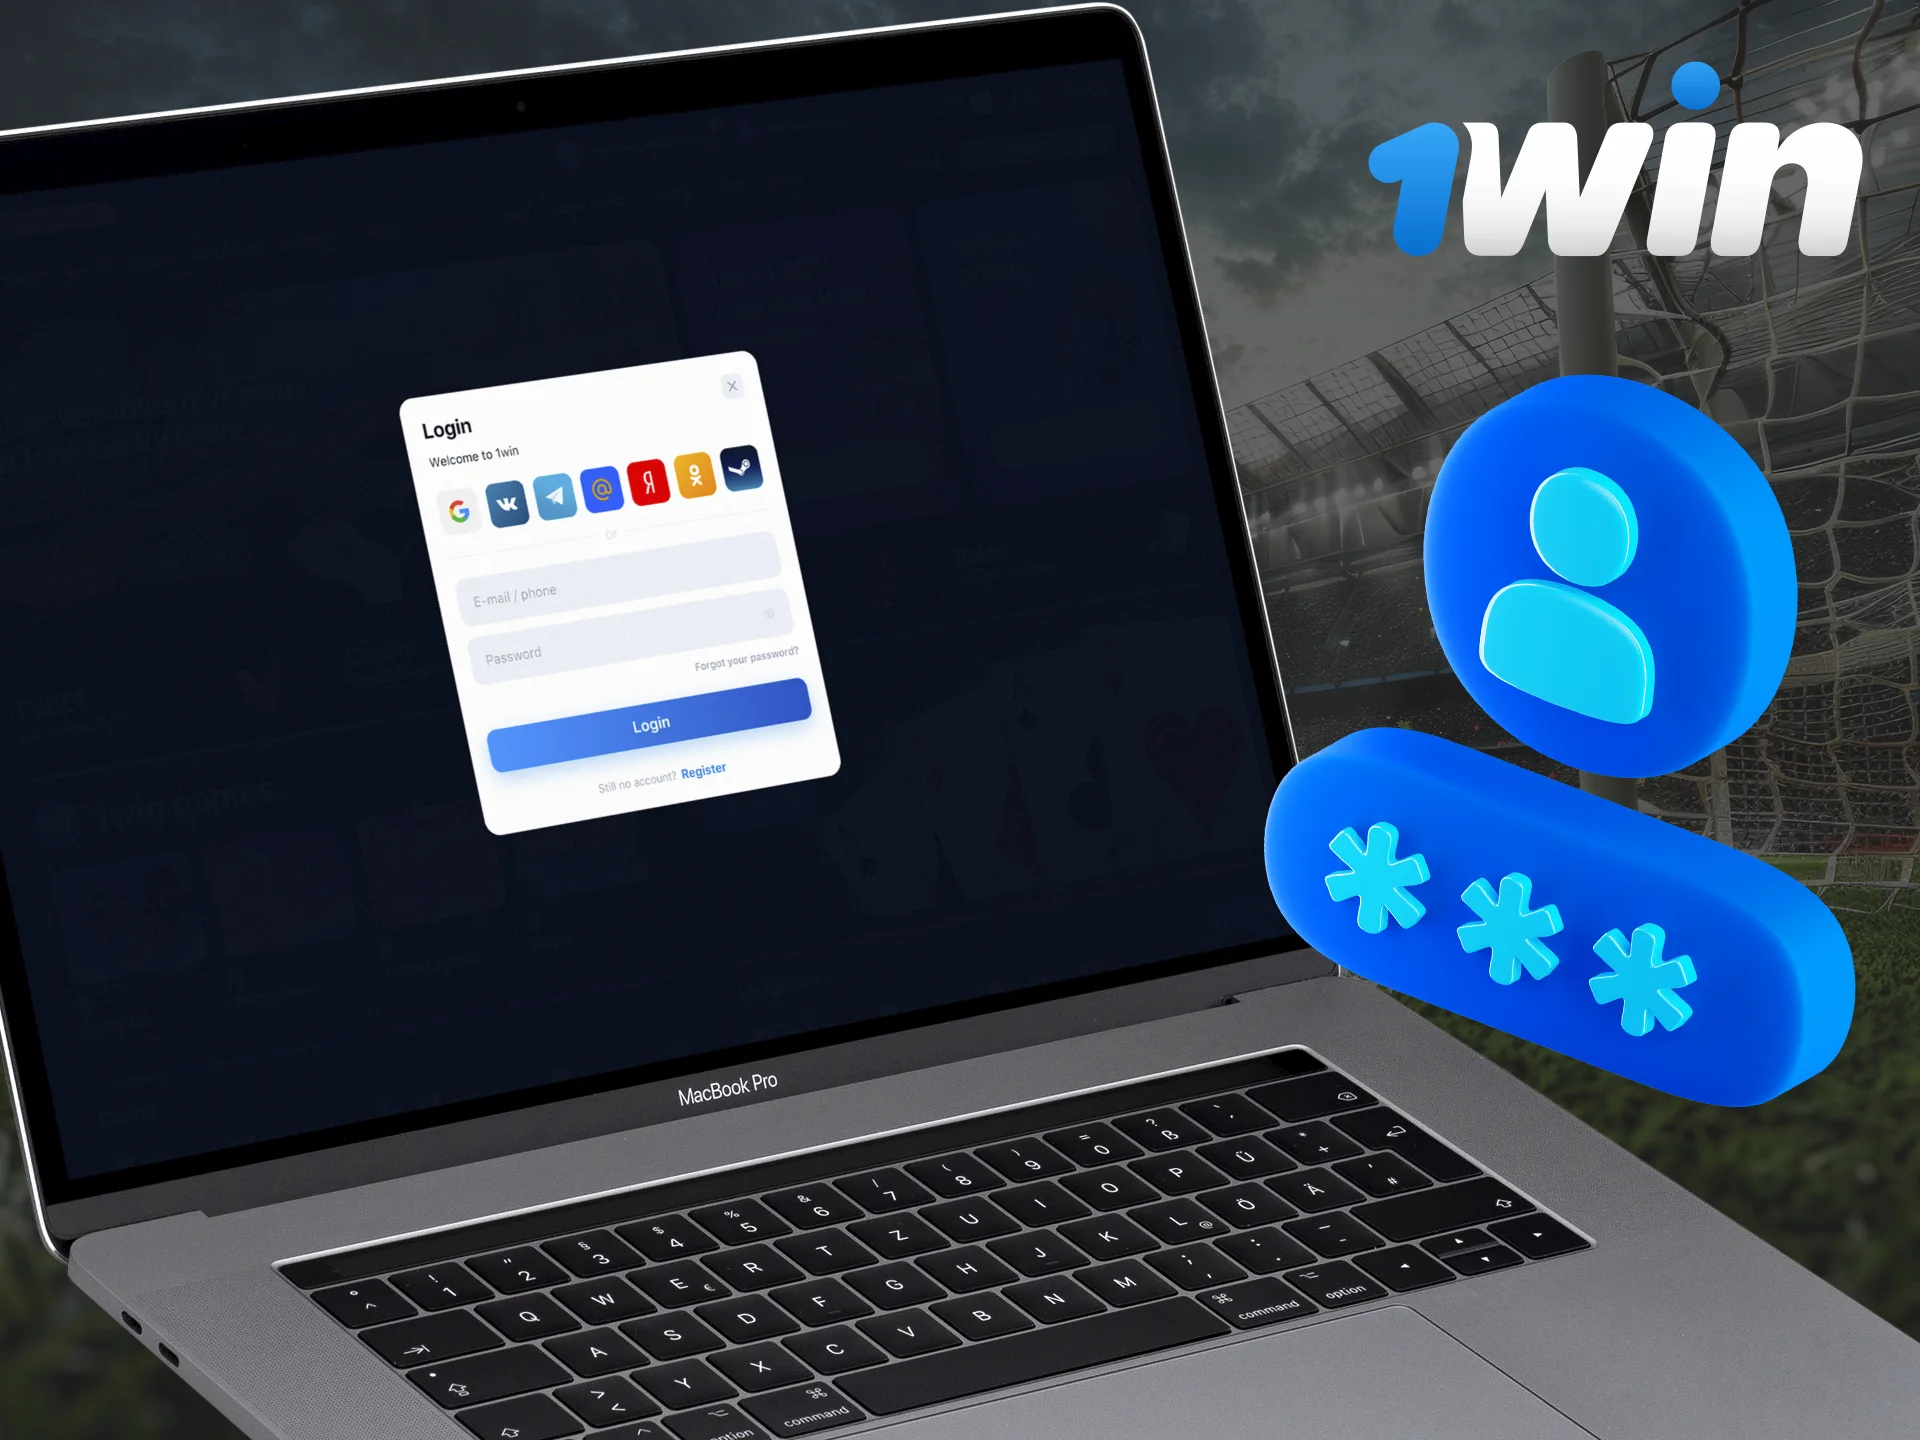 Enter your login details to access your 1Win account.